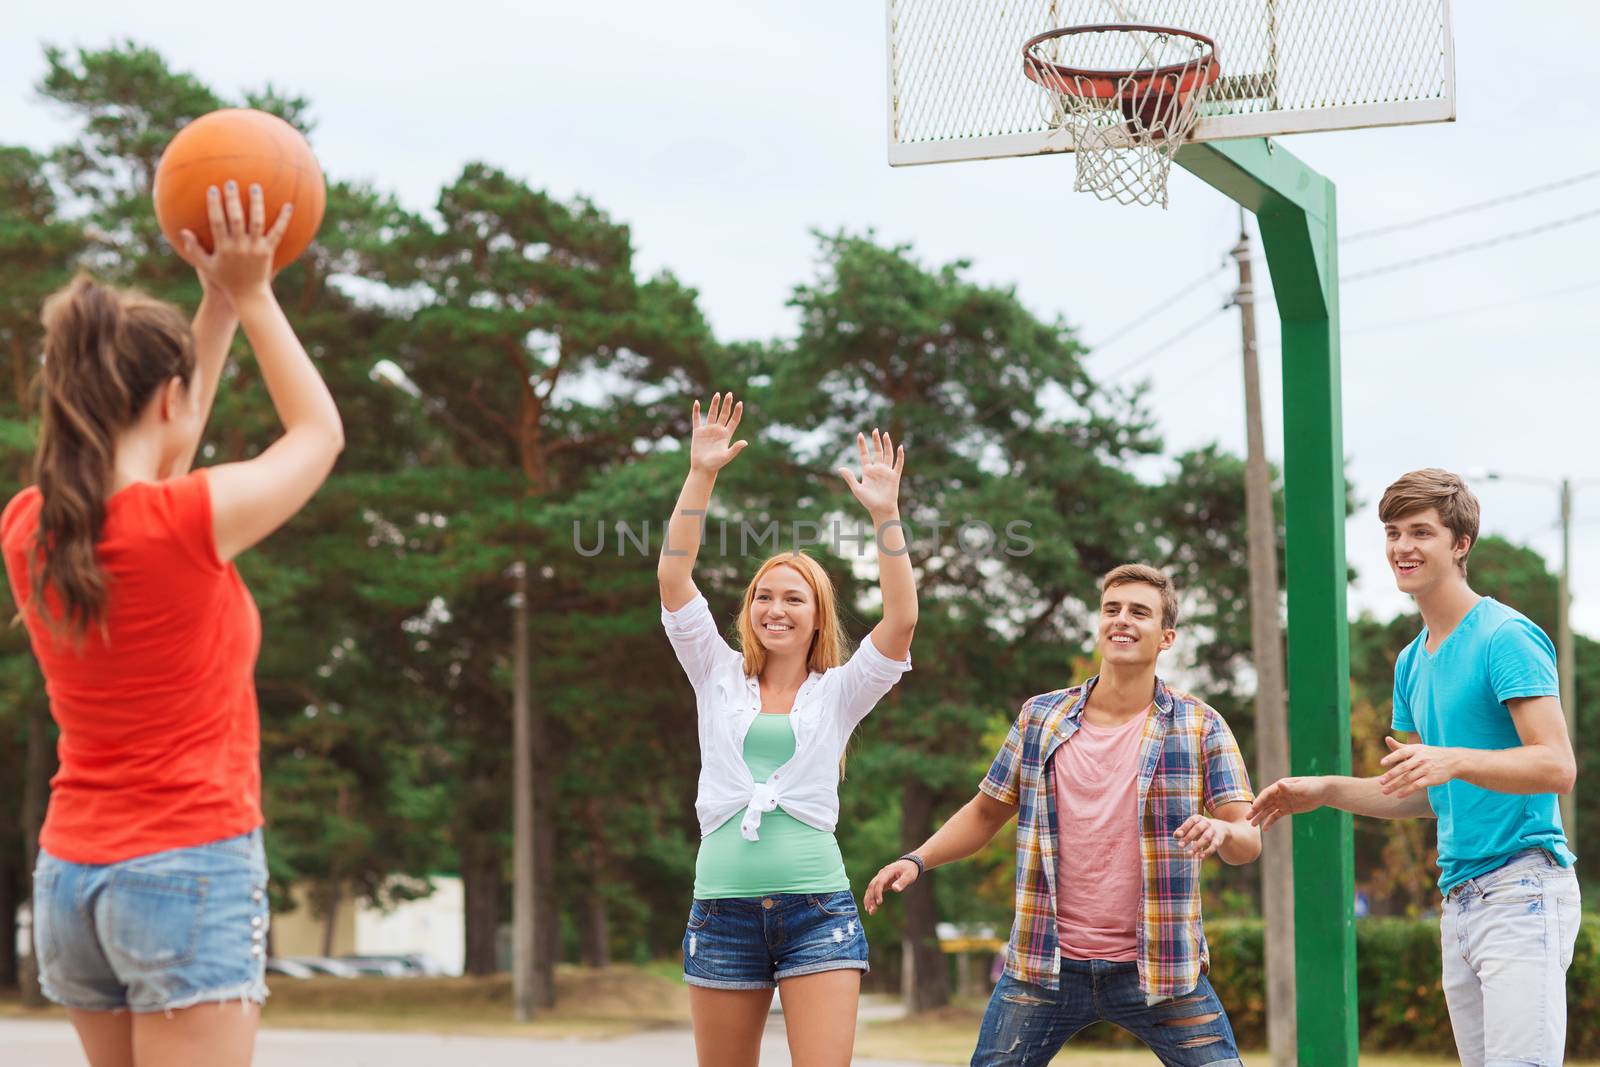 summer vacation, holidays, games and friendship concept - group of smiling teenagers playing basketball outdoors